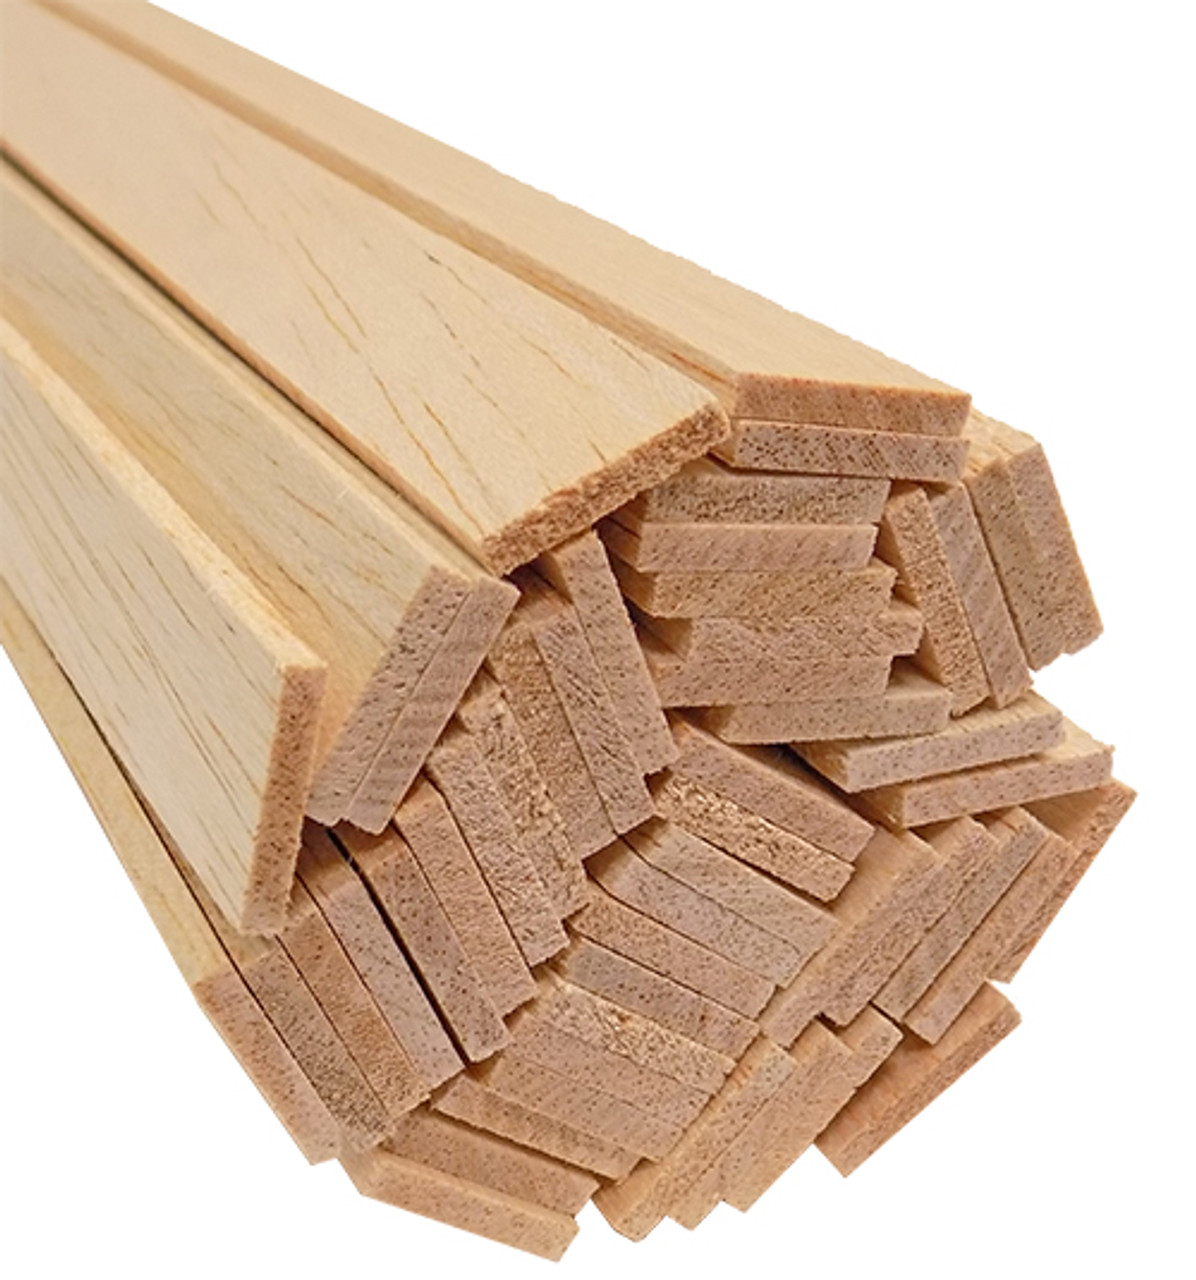 Red beech wood strips 0.6-2mm Thick 25 pieces wood model ship kits